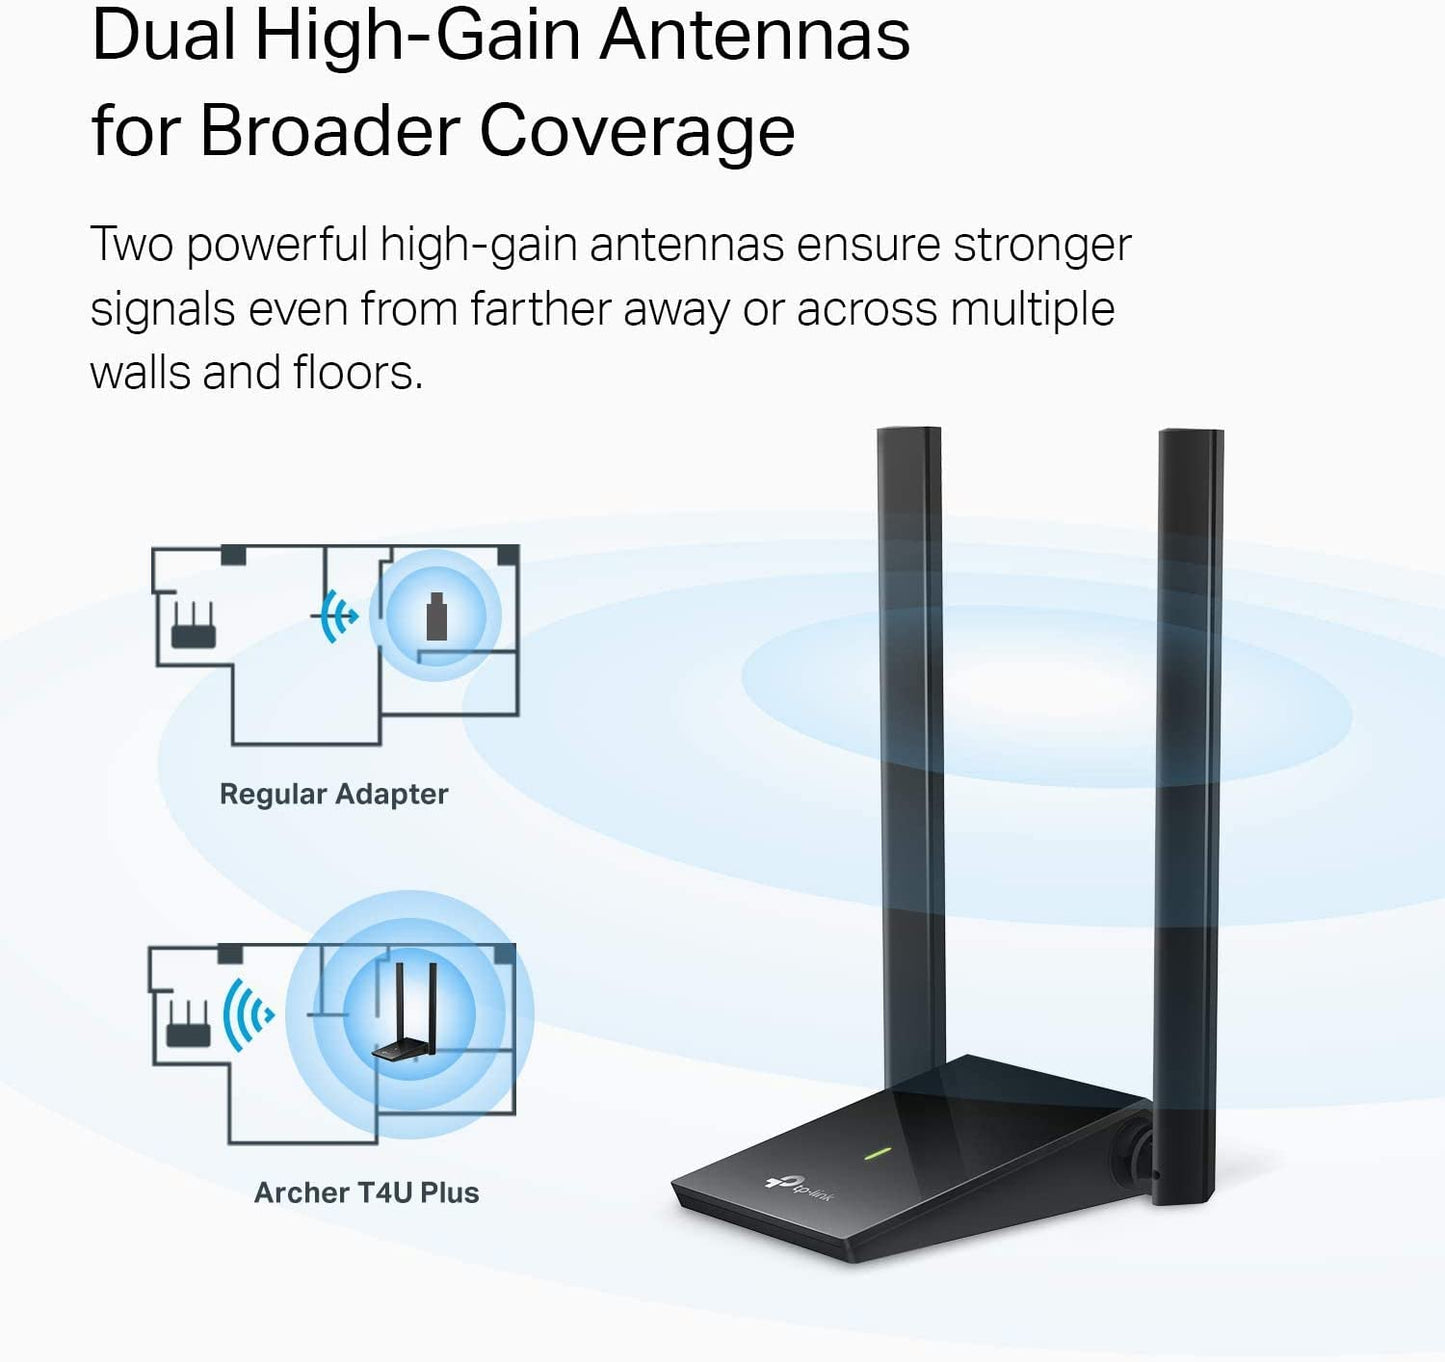 TP-Link USB WiFi Adapter, AC1300Mbps Dual Band 5dBi High Gain Antenna 2.4GHz/ 5GHz Wireless Network Adapter for Desktop PC (Archer T4U Plus)- Supports Windows 11/10/8.1/8/7, Mac OS 10.9-10.14